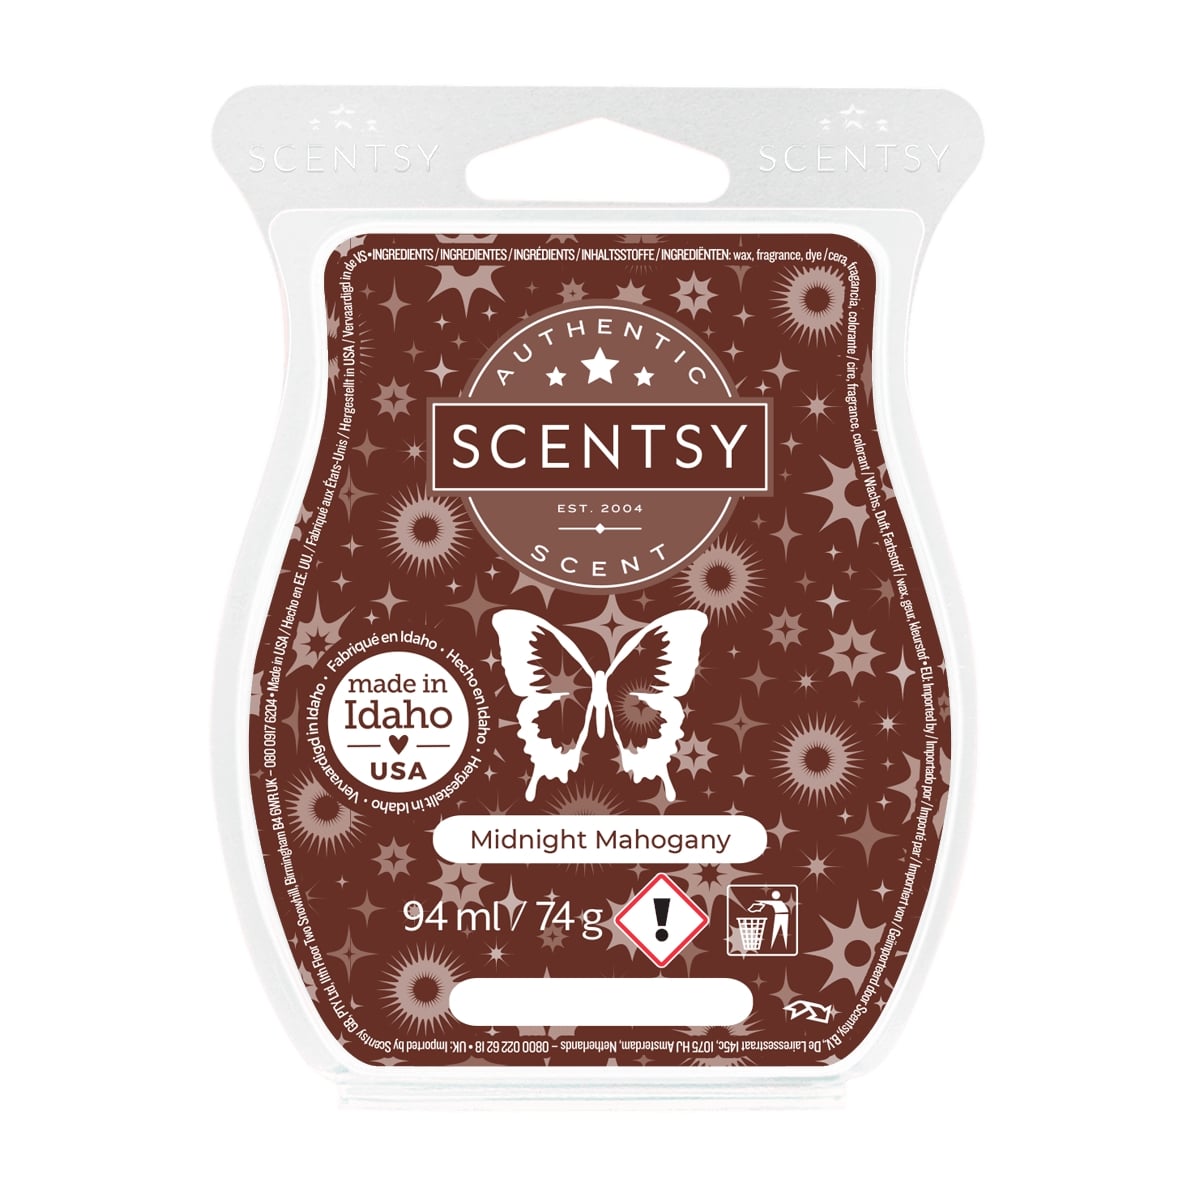 https://www.thecandleboutique.co.uk/wp-content/uploads/2023/08/Midnight-Mahogany-Scentsy-Bar.jpg